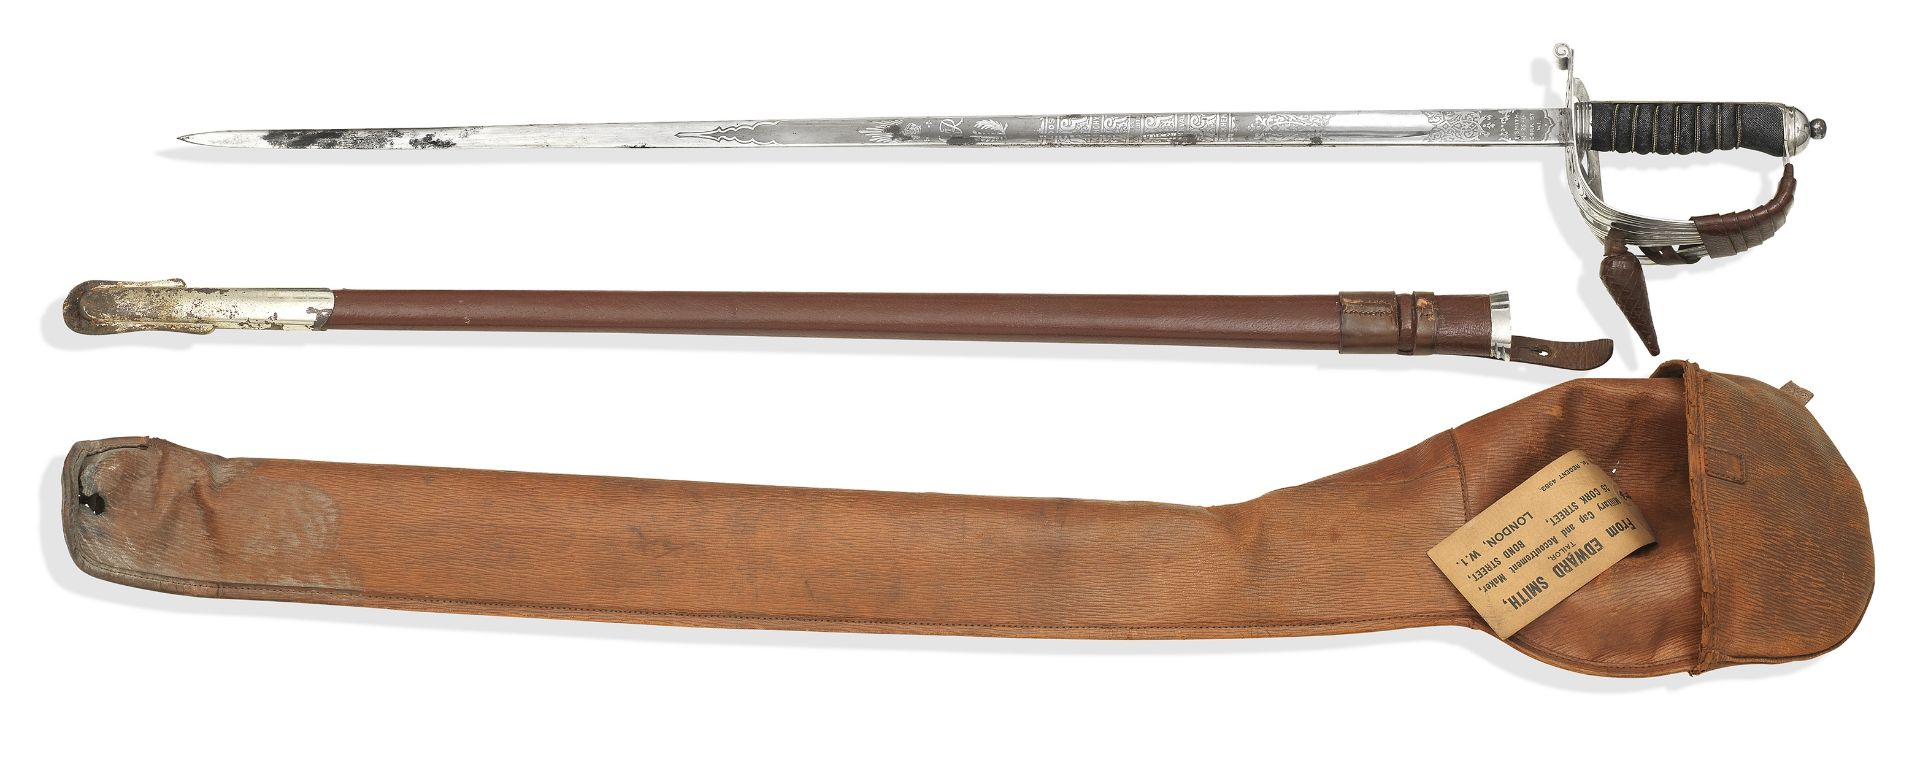 A George VI Regulation Sword For An Officer In The Welsh Guards By E. Smith, 25 Cork St., W.1